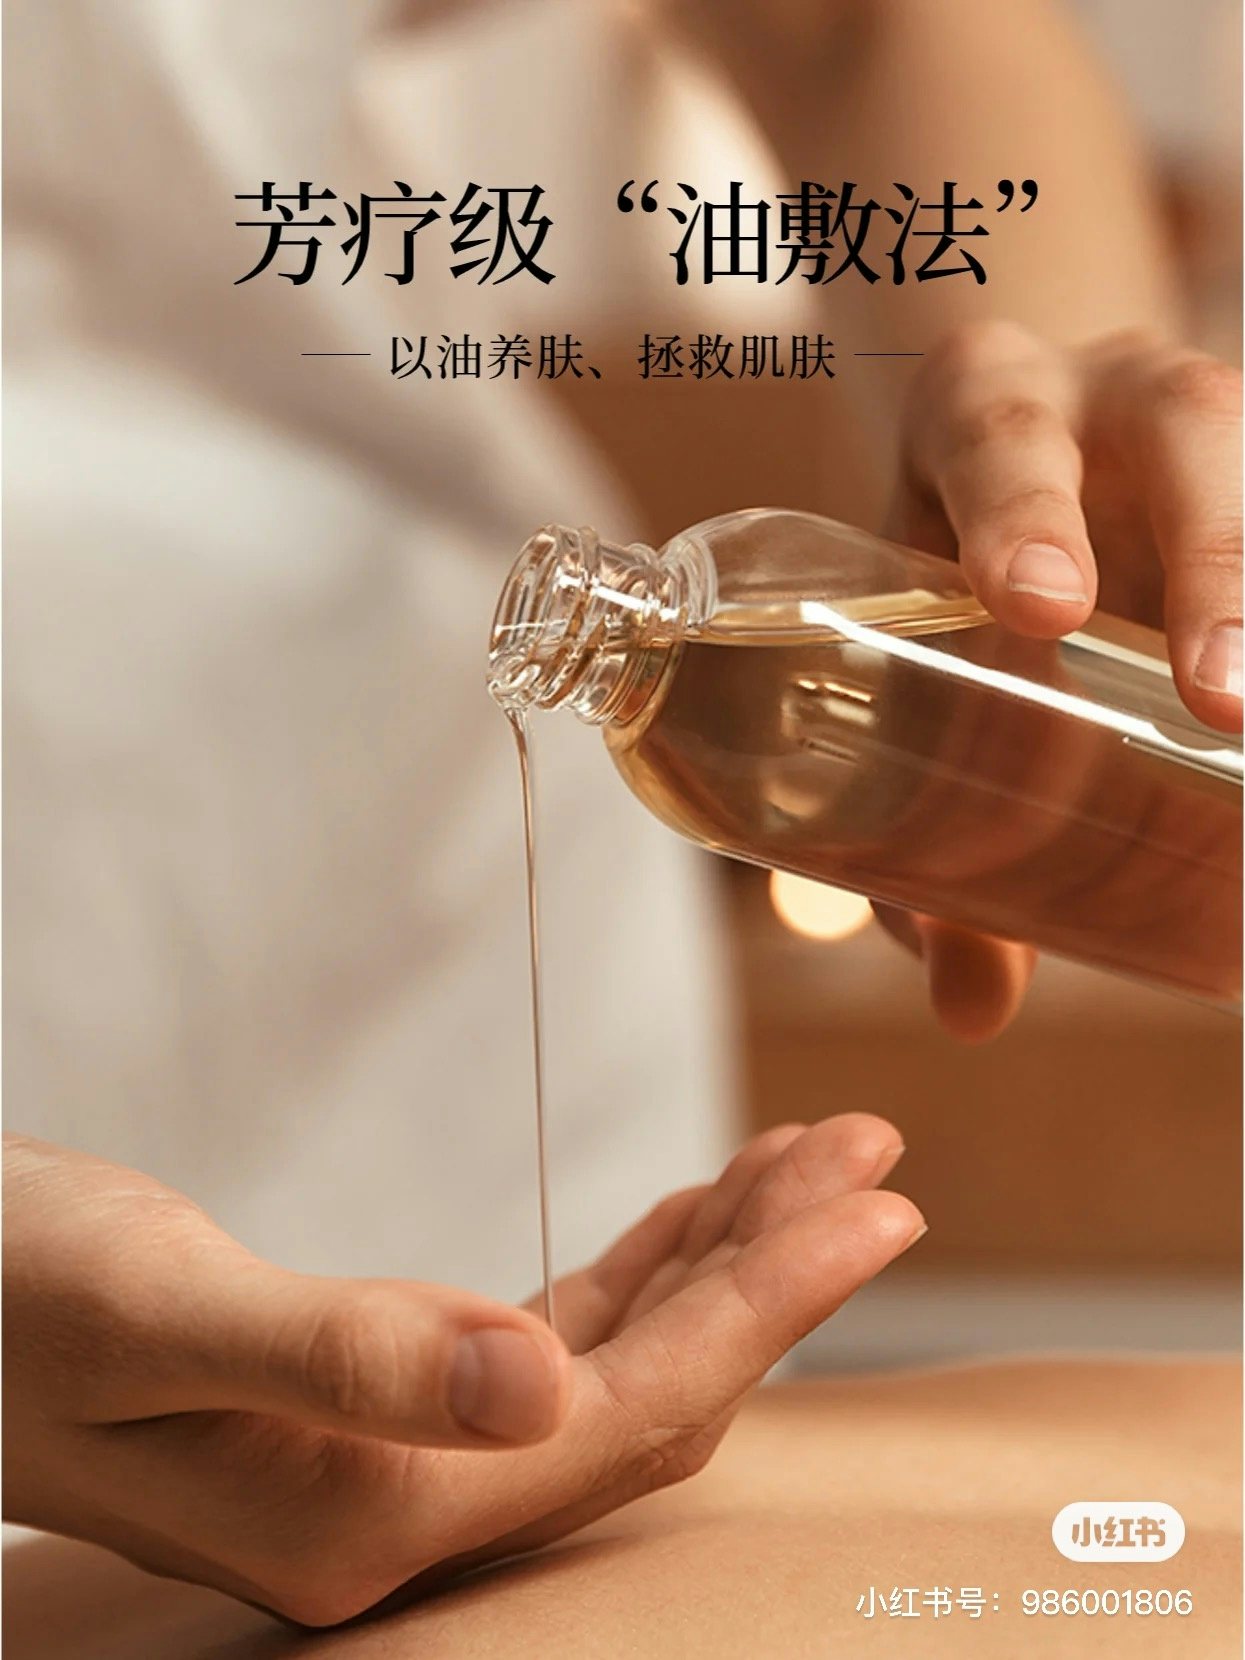 The 'nourishing skin with oil' regimen encompasses massaging oil serum into skin to maximize absorption and achieve a healthy glow. Image: Xiaohongshu